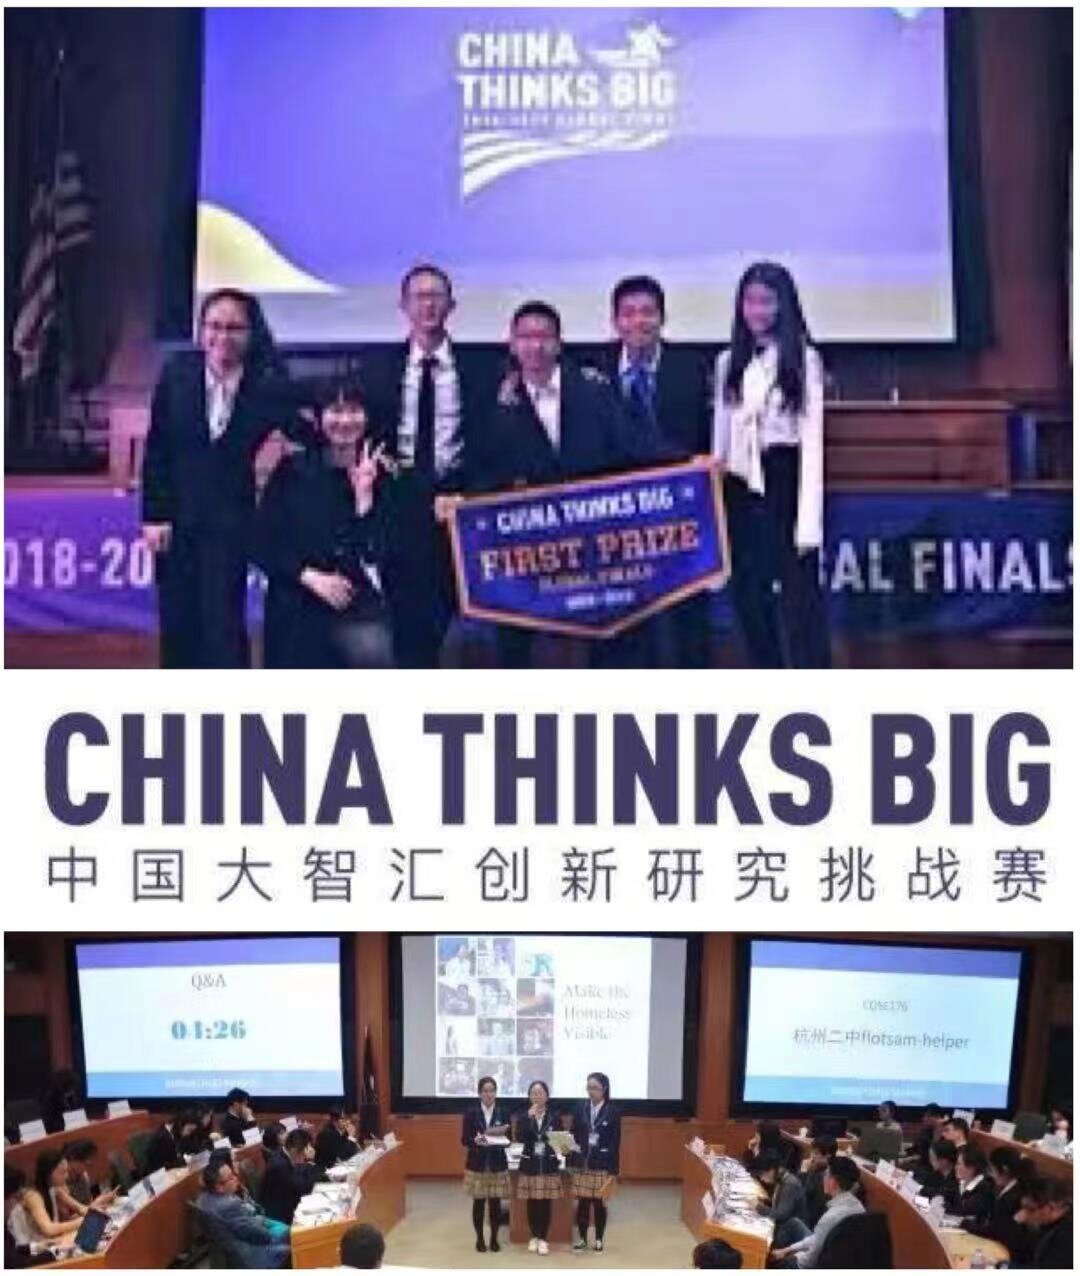 Seth Harvey: Competitions like 'China Thinks Big' are helping Chinese students to develop skills in critical thinking, teamwork, activism, and curiosity.